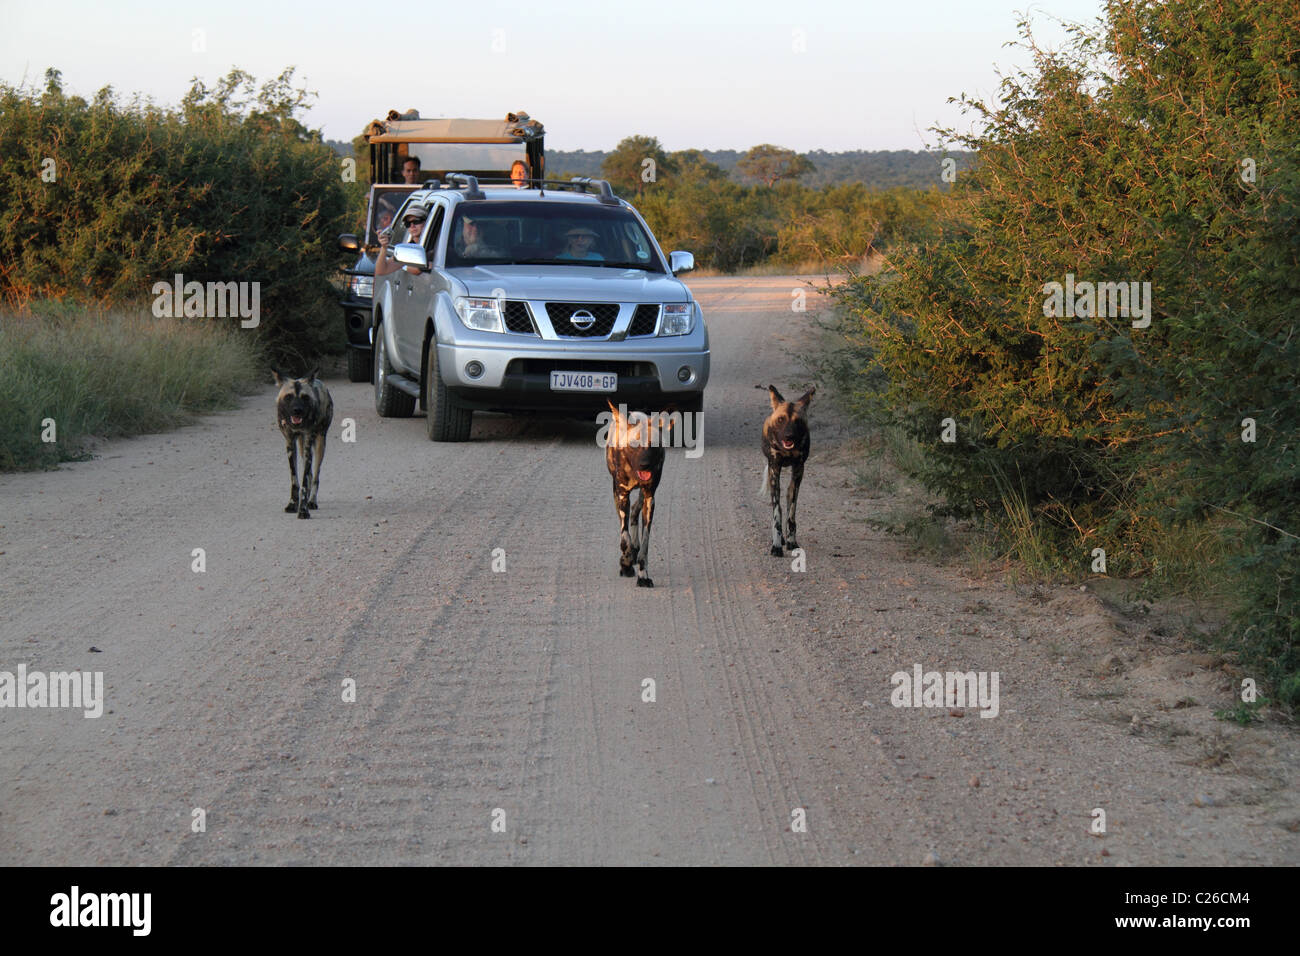 African wild dog, three dogs on road being followed by vehicles Stock Photo